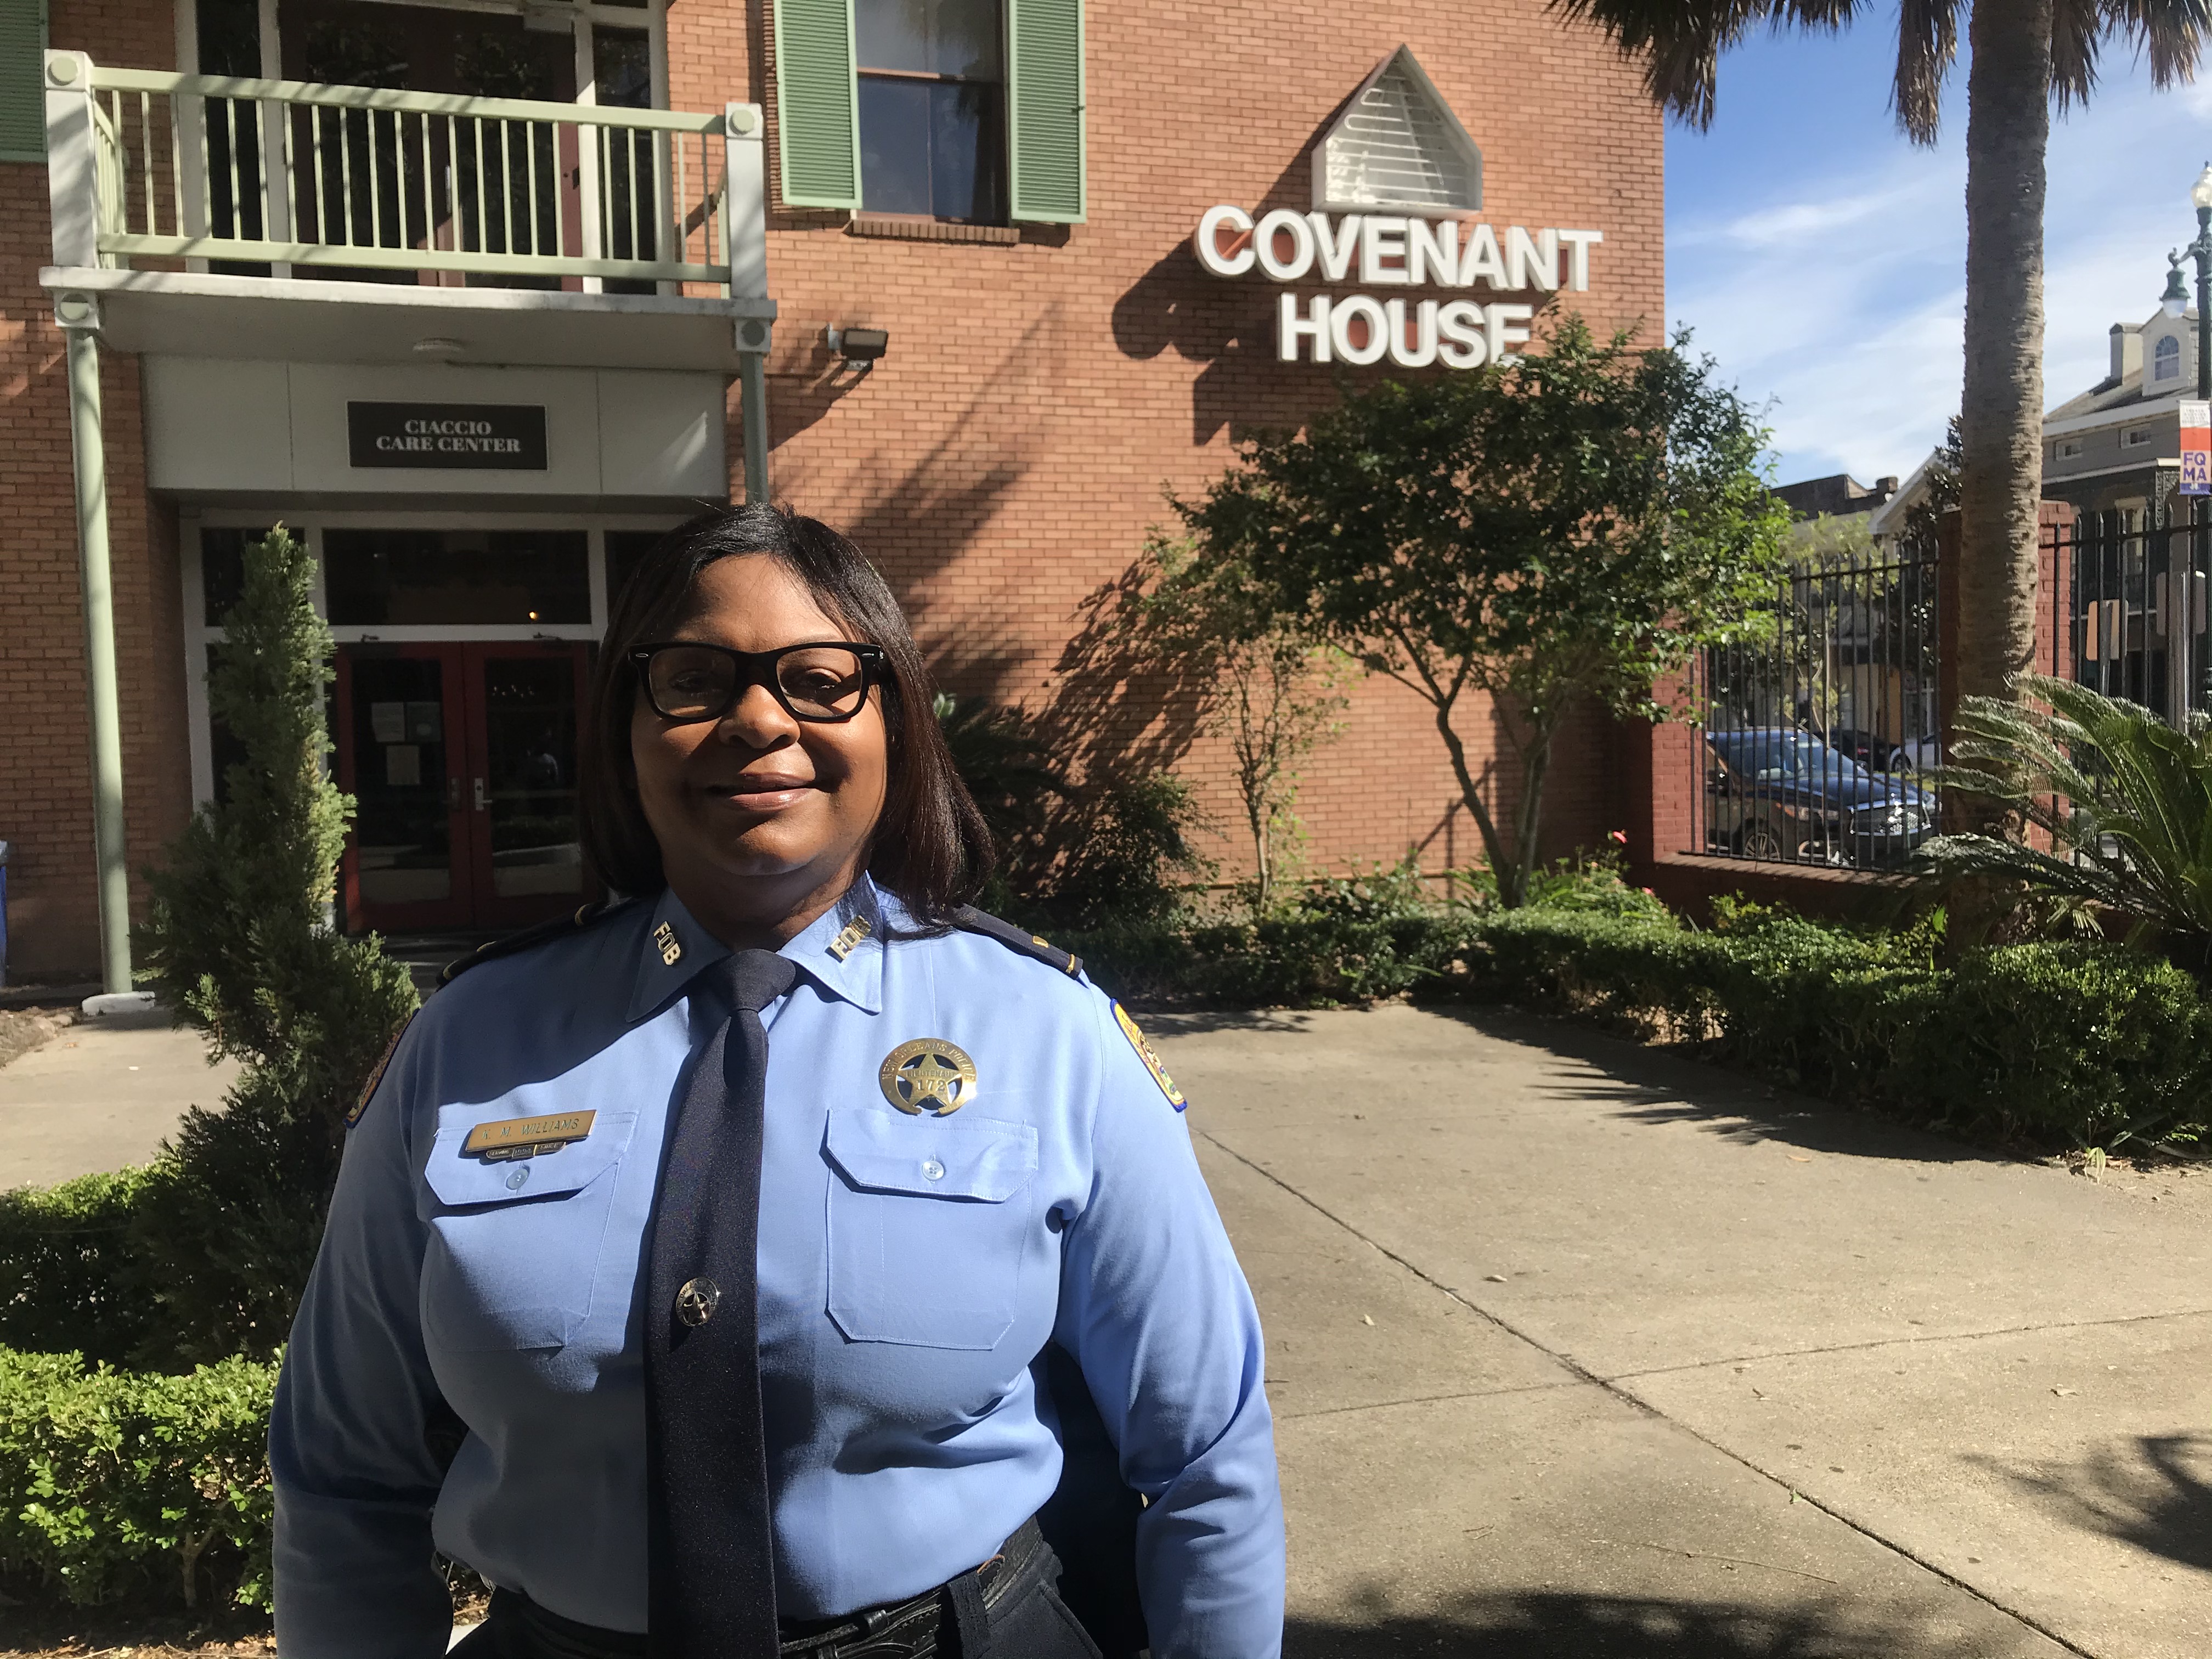 NOPD's Lt. Kim Williams Sleeps Out for New Orleans' Covenant House 